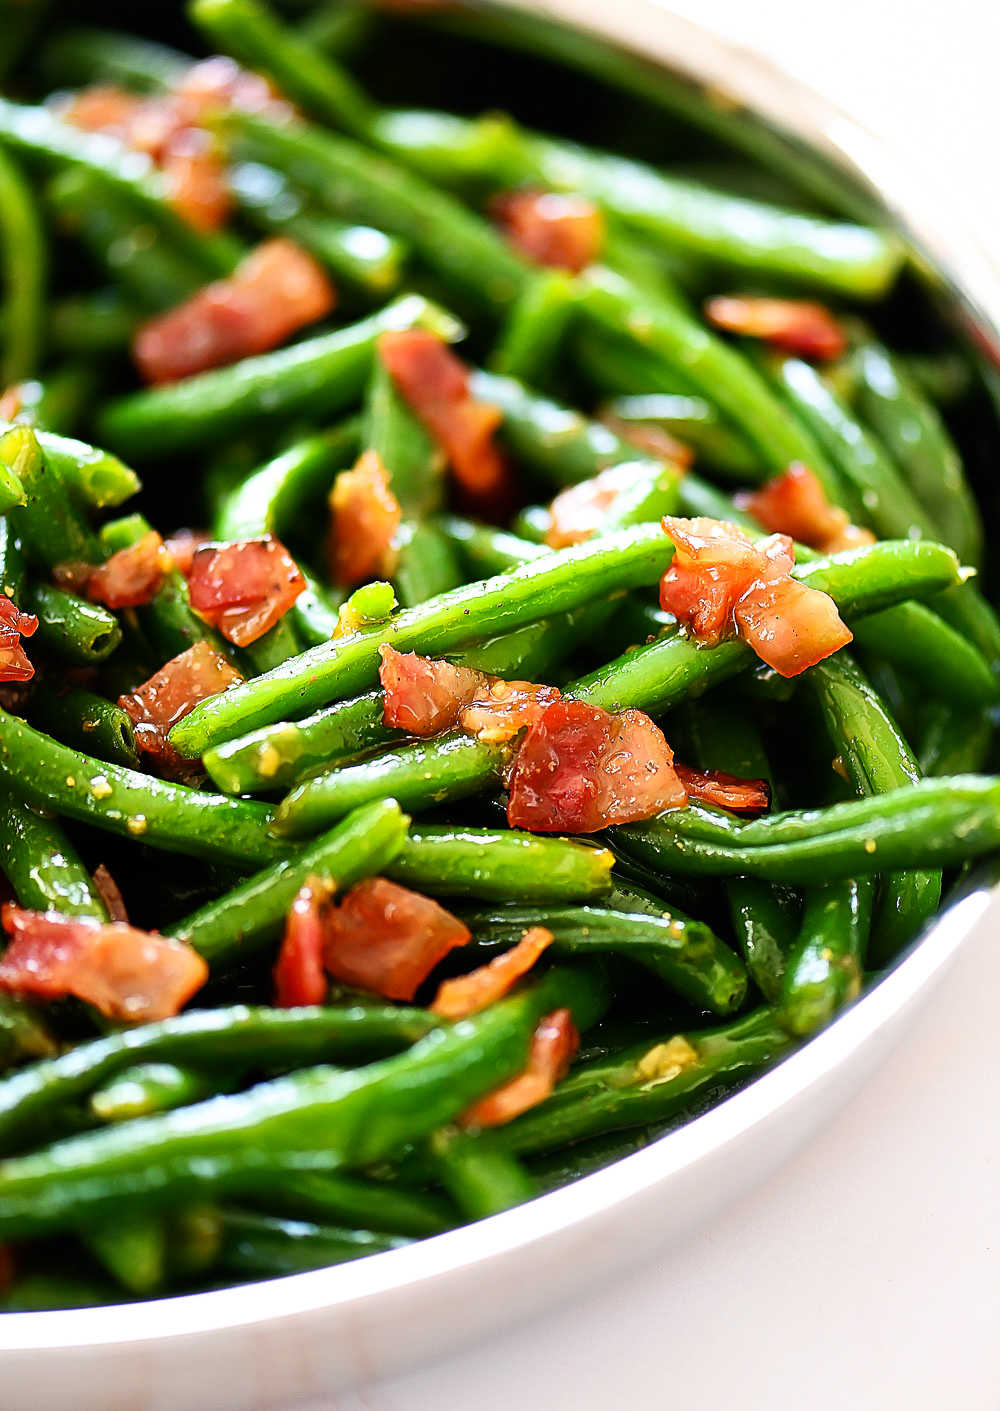 Green beans with bacon and brown sugar.